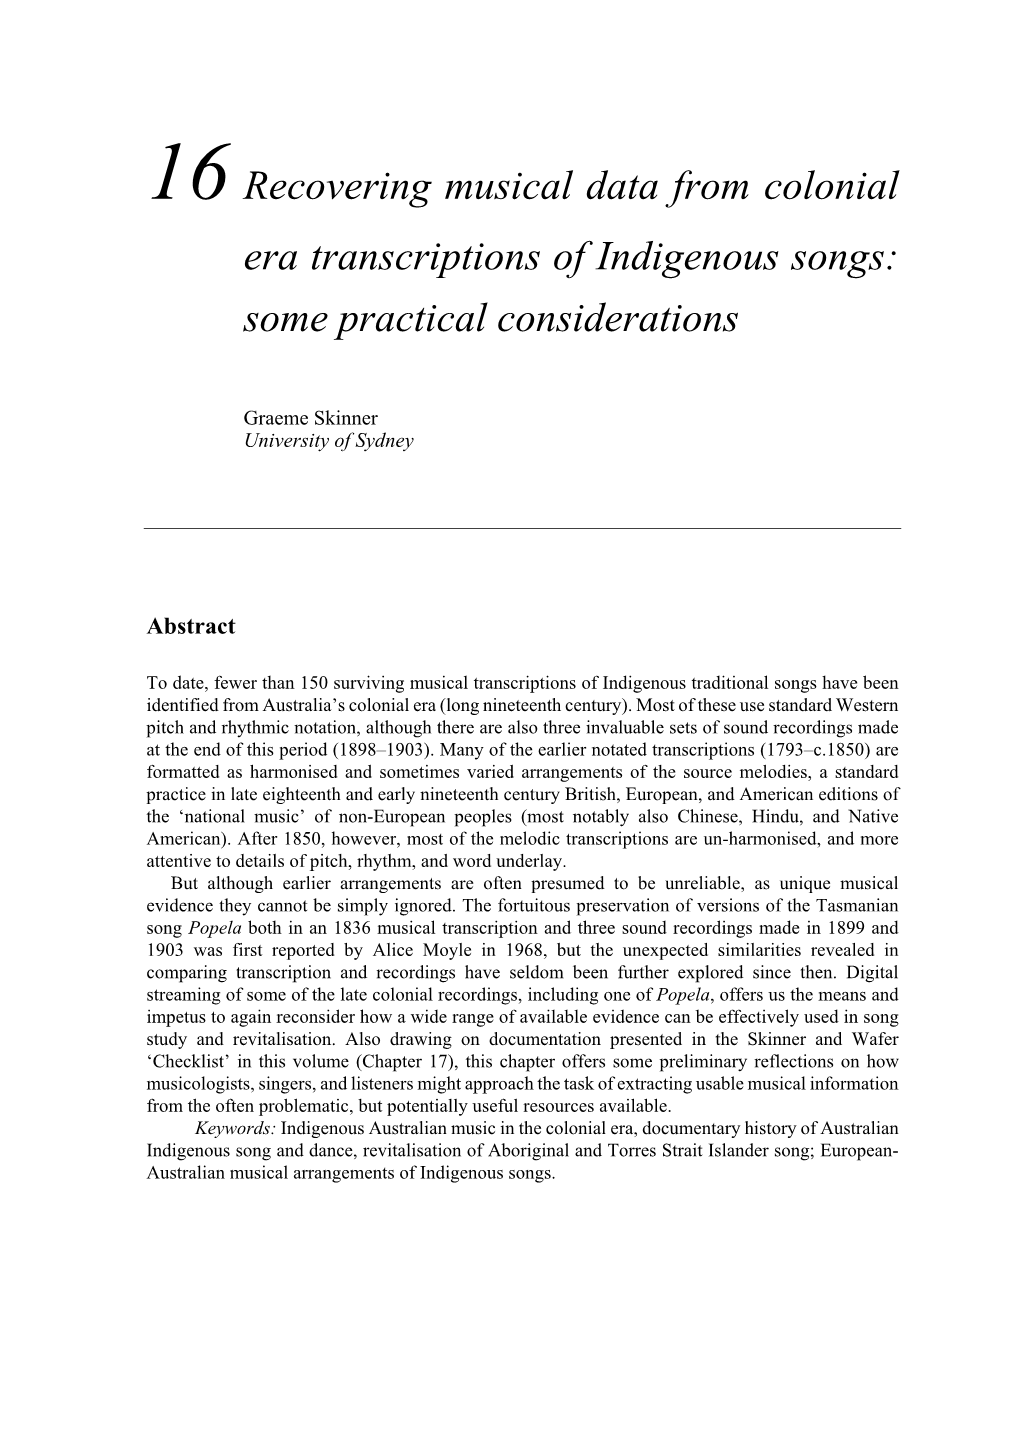 16 Recovering Musical Data from Colonial Era Transcriptions of Indigenous Songs: Some Practical Considerations